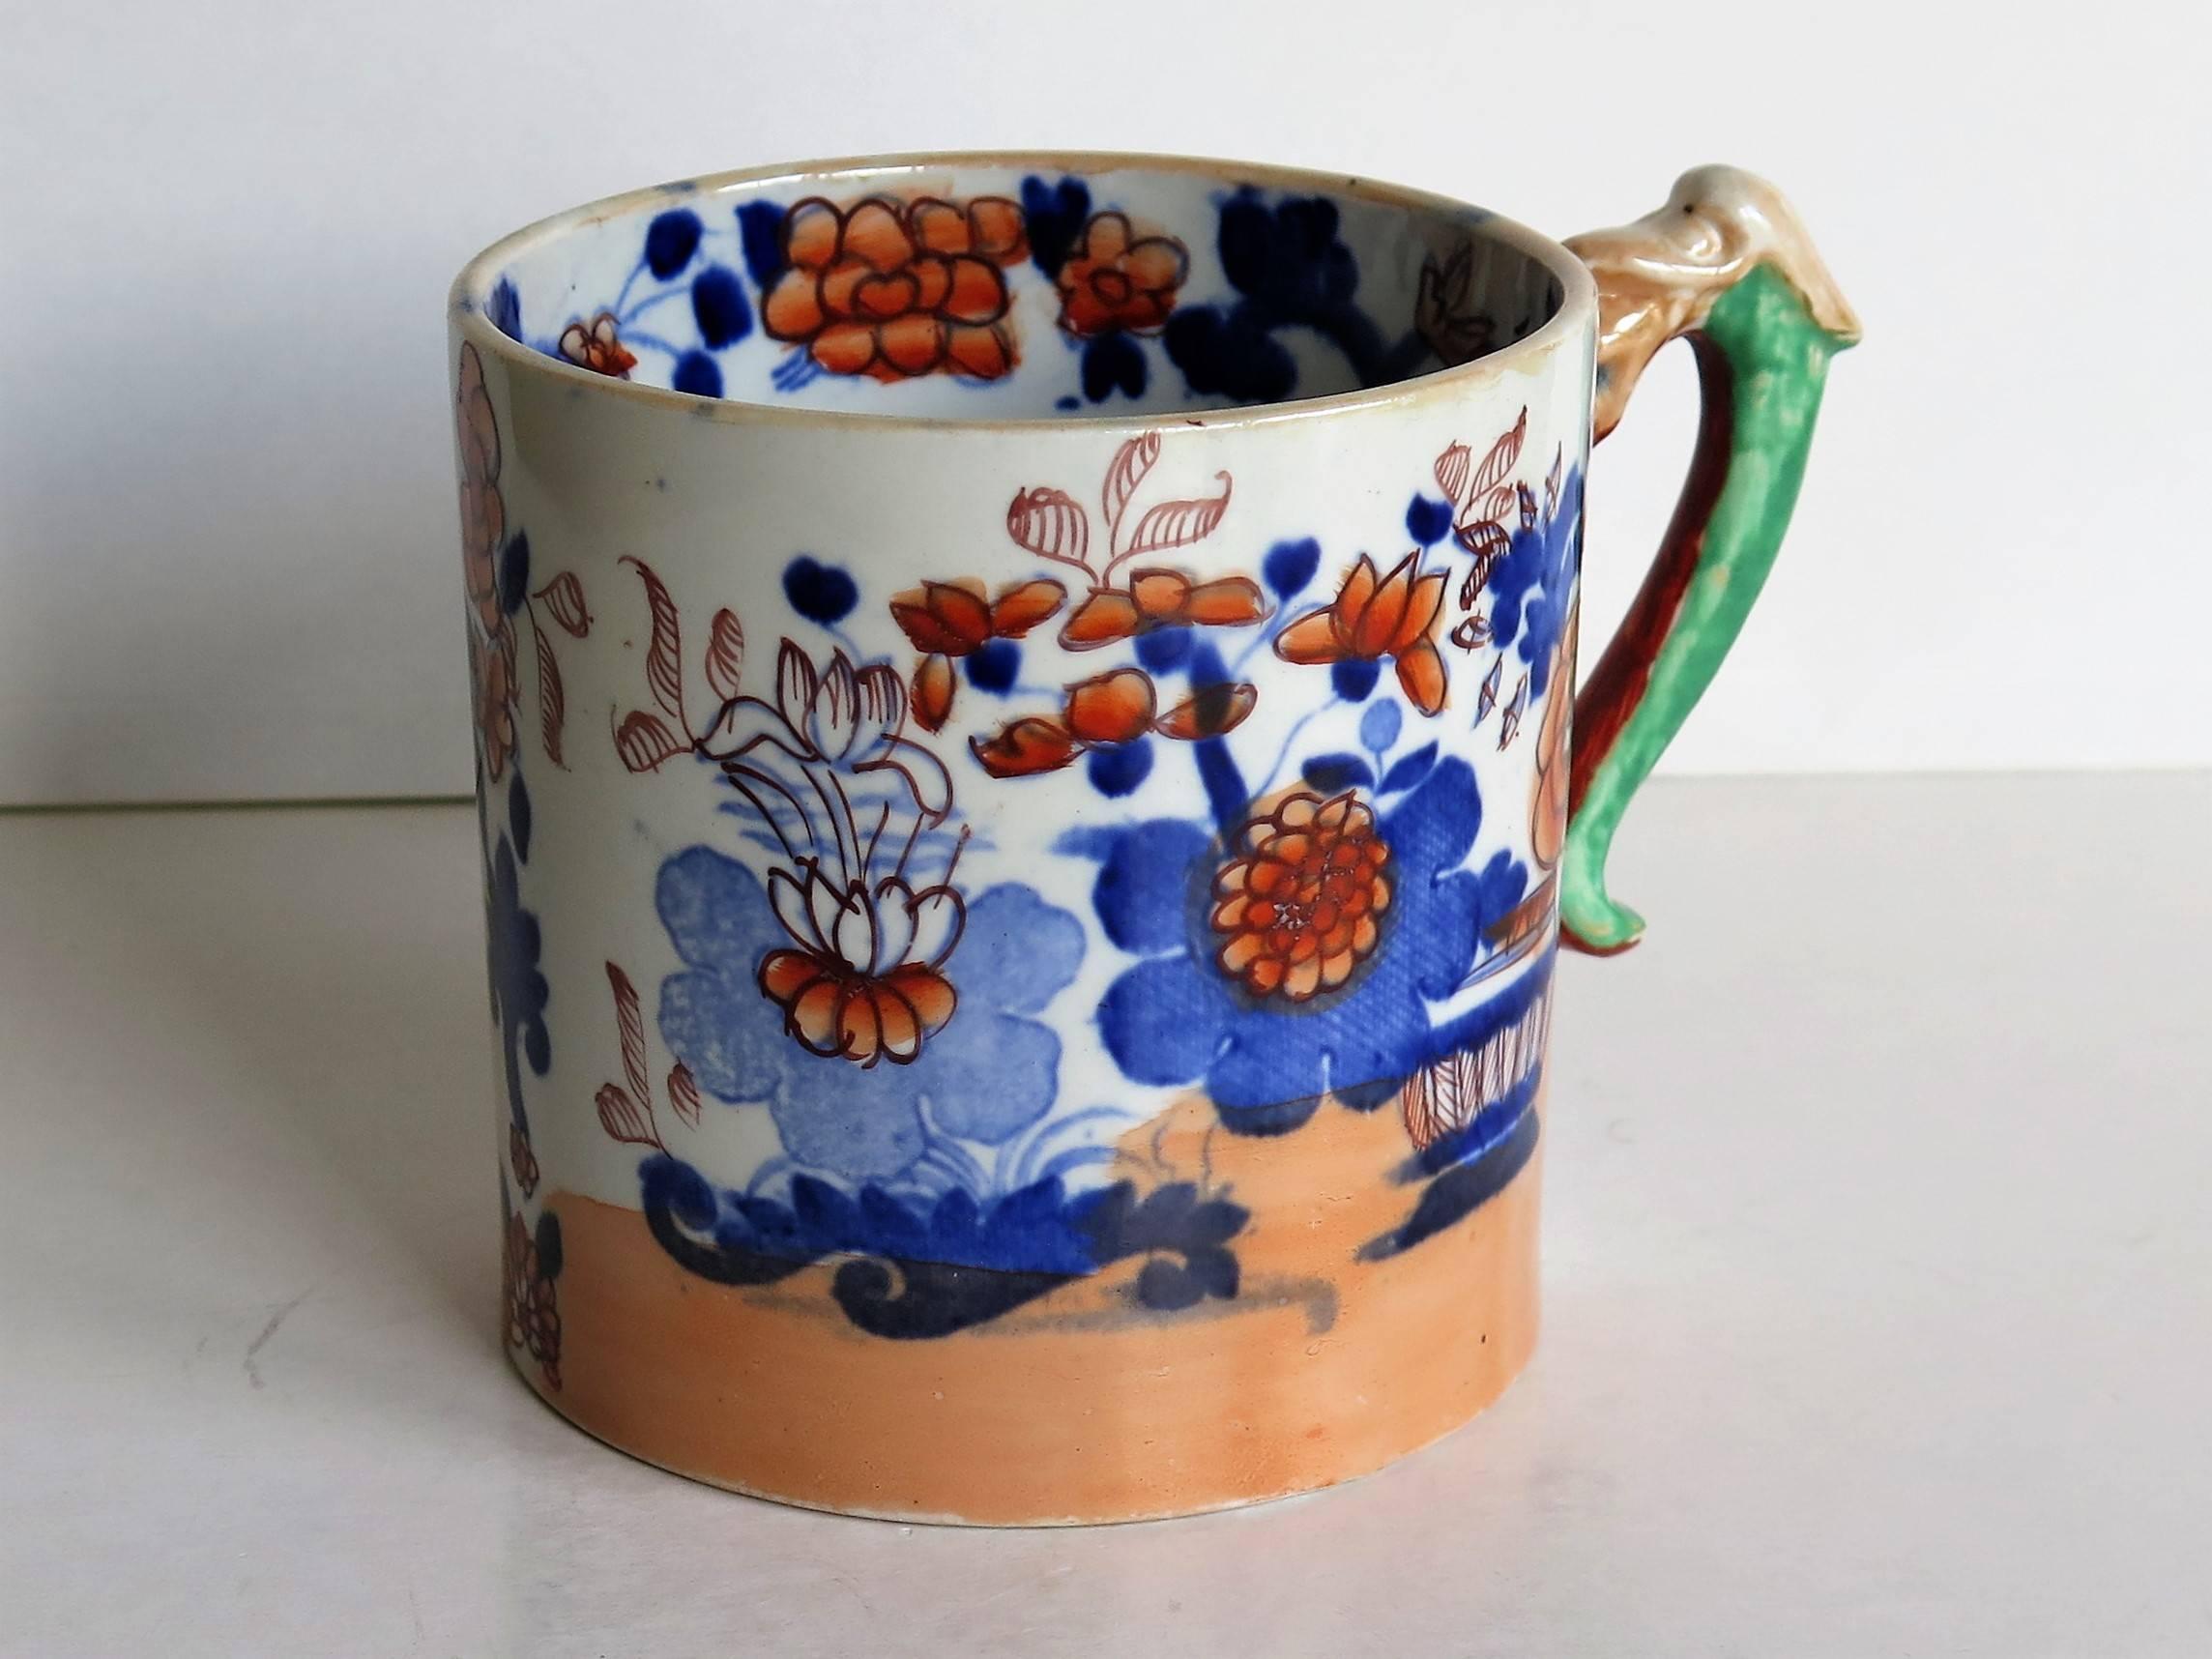 This is a good pottery mug made by the English factory of Mason's Ironstone, fully marked and dating to the early 19th century, circa 1825.

Early Mason's mugs tend to be fairly rare and hard to find.

The mug is cylindrical with a slight taper